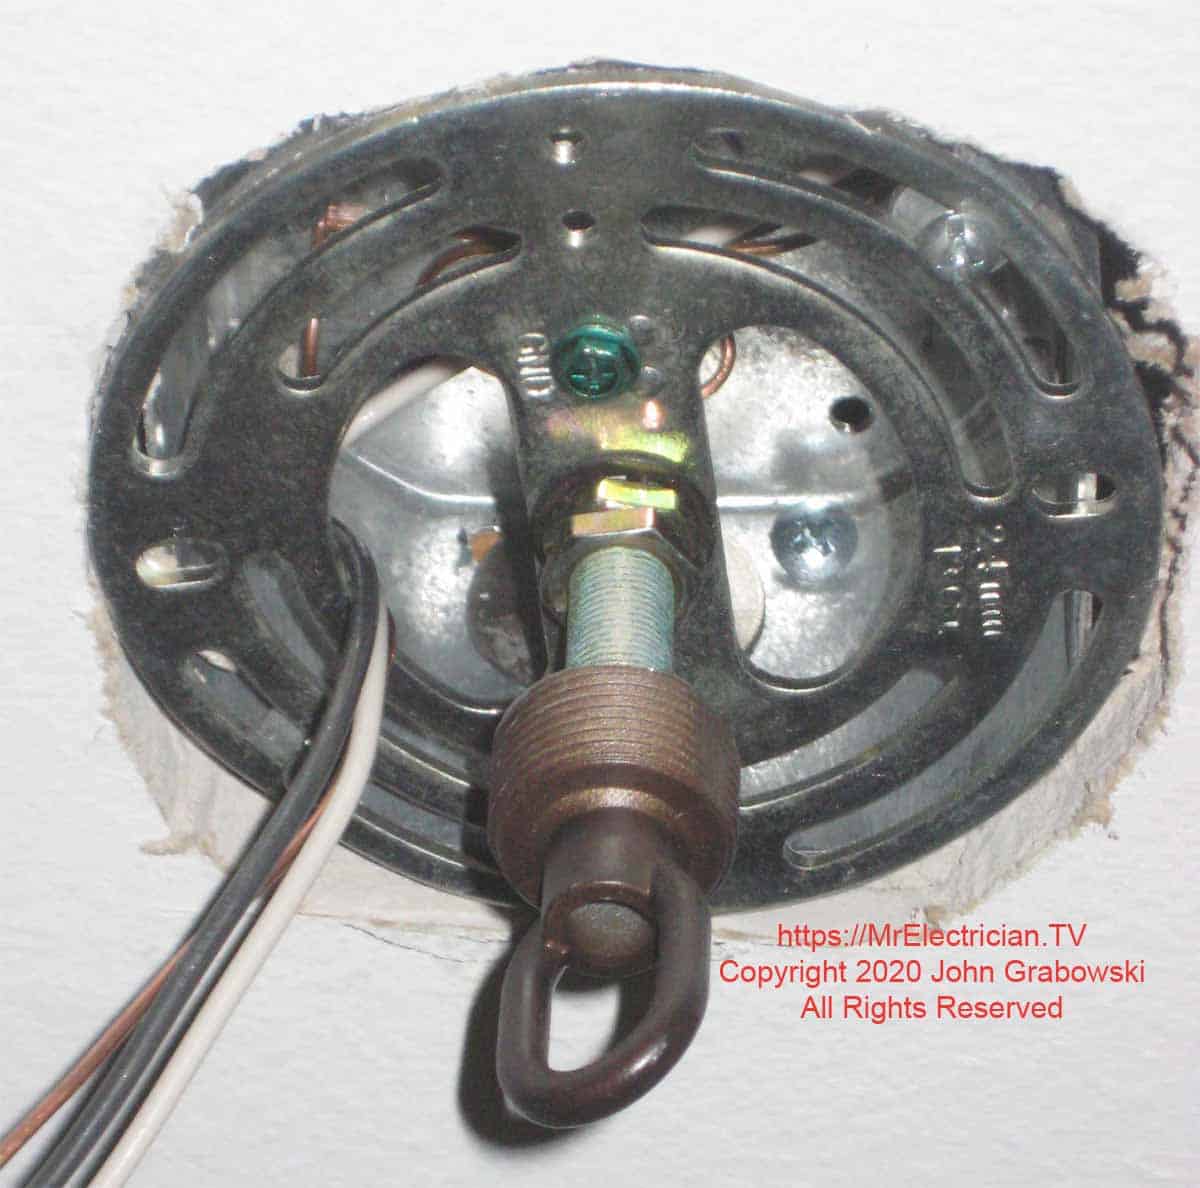 The light fixture hook and bracket are attached to the deep octagon electrical box in the ceiling